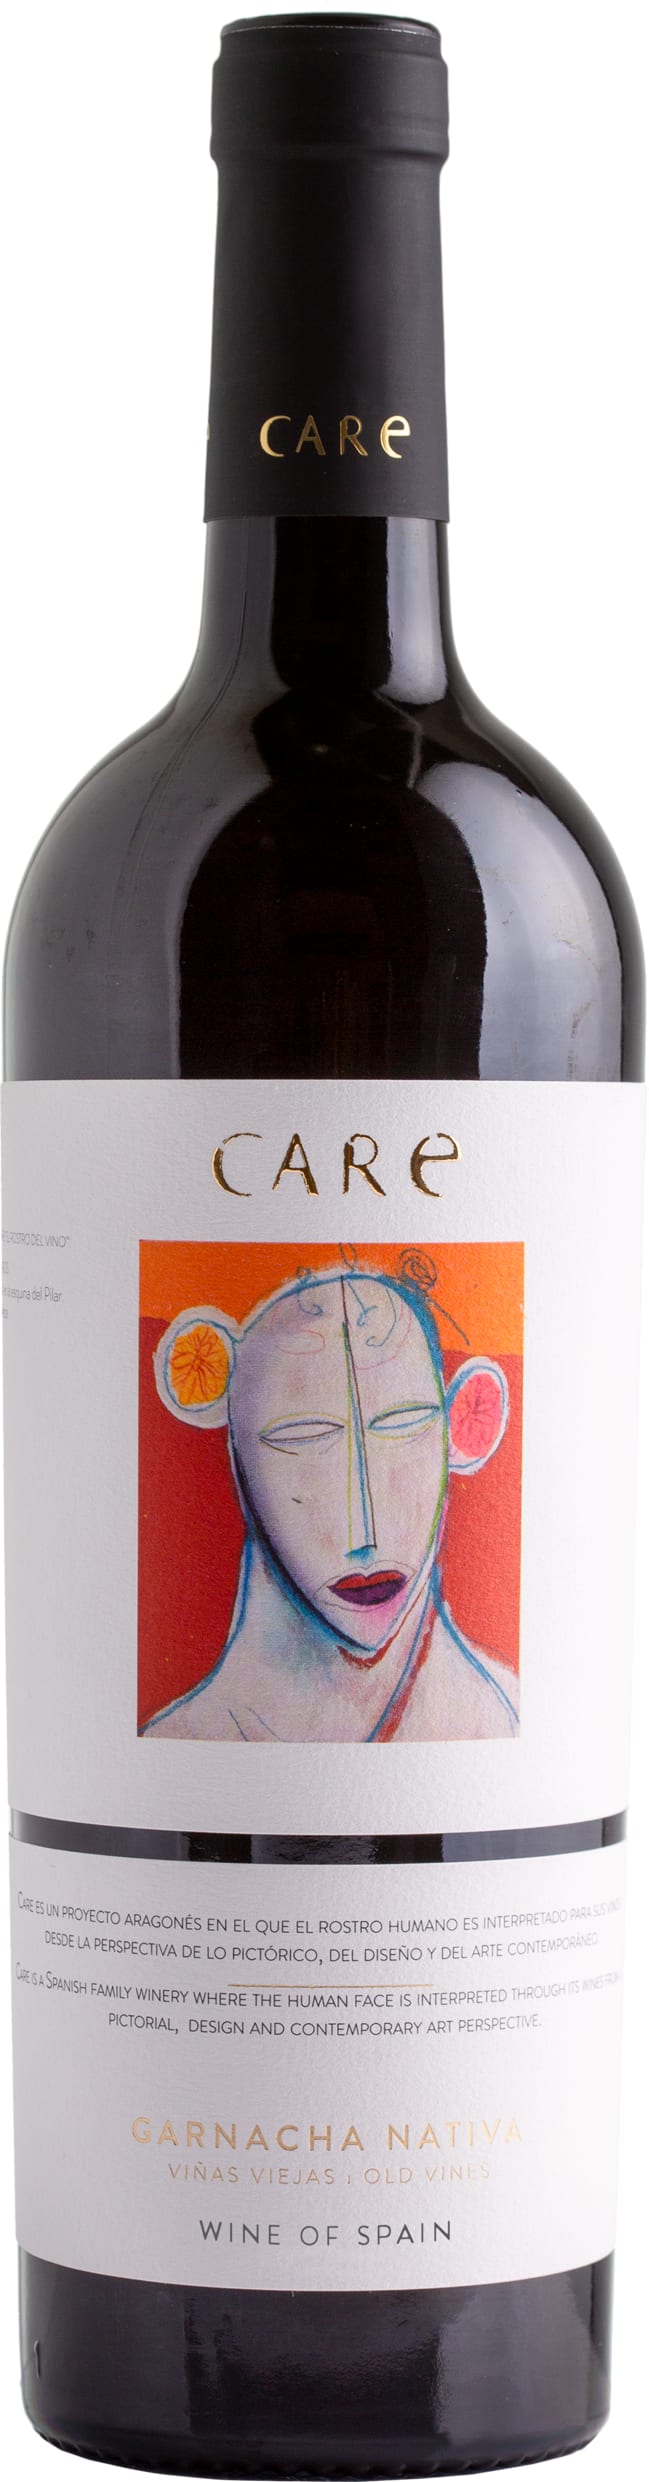 Care Garnacha Nativa 2021 75cl - Buy Care Wines from GREAT WINES DIRECT wine shop